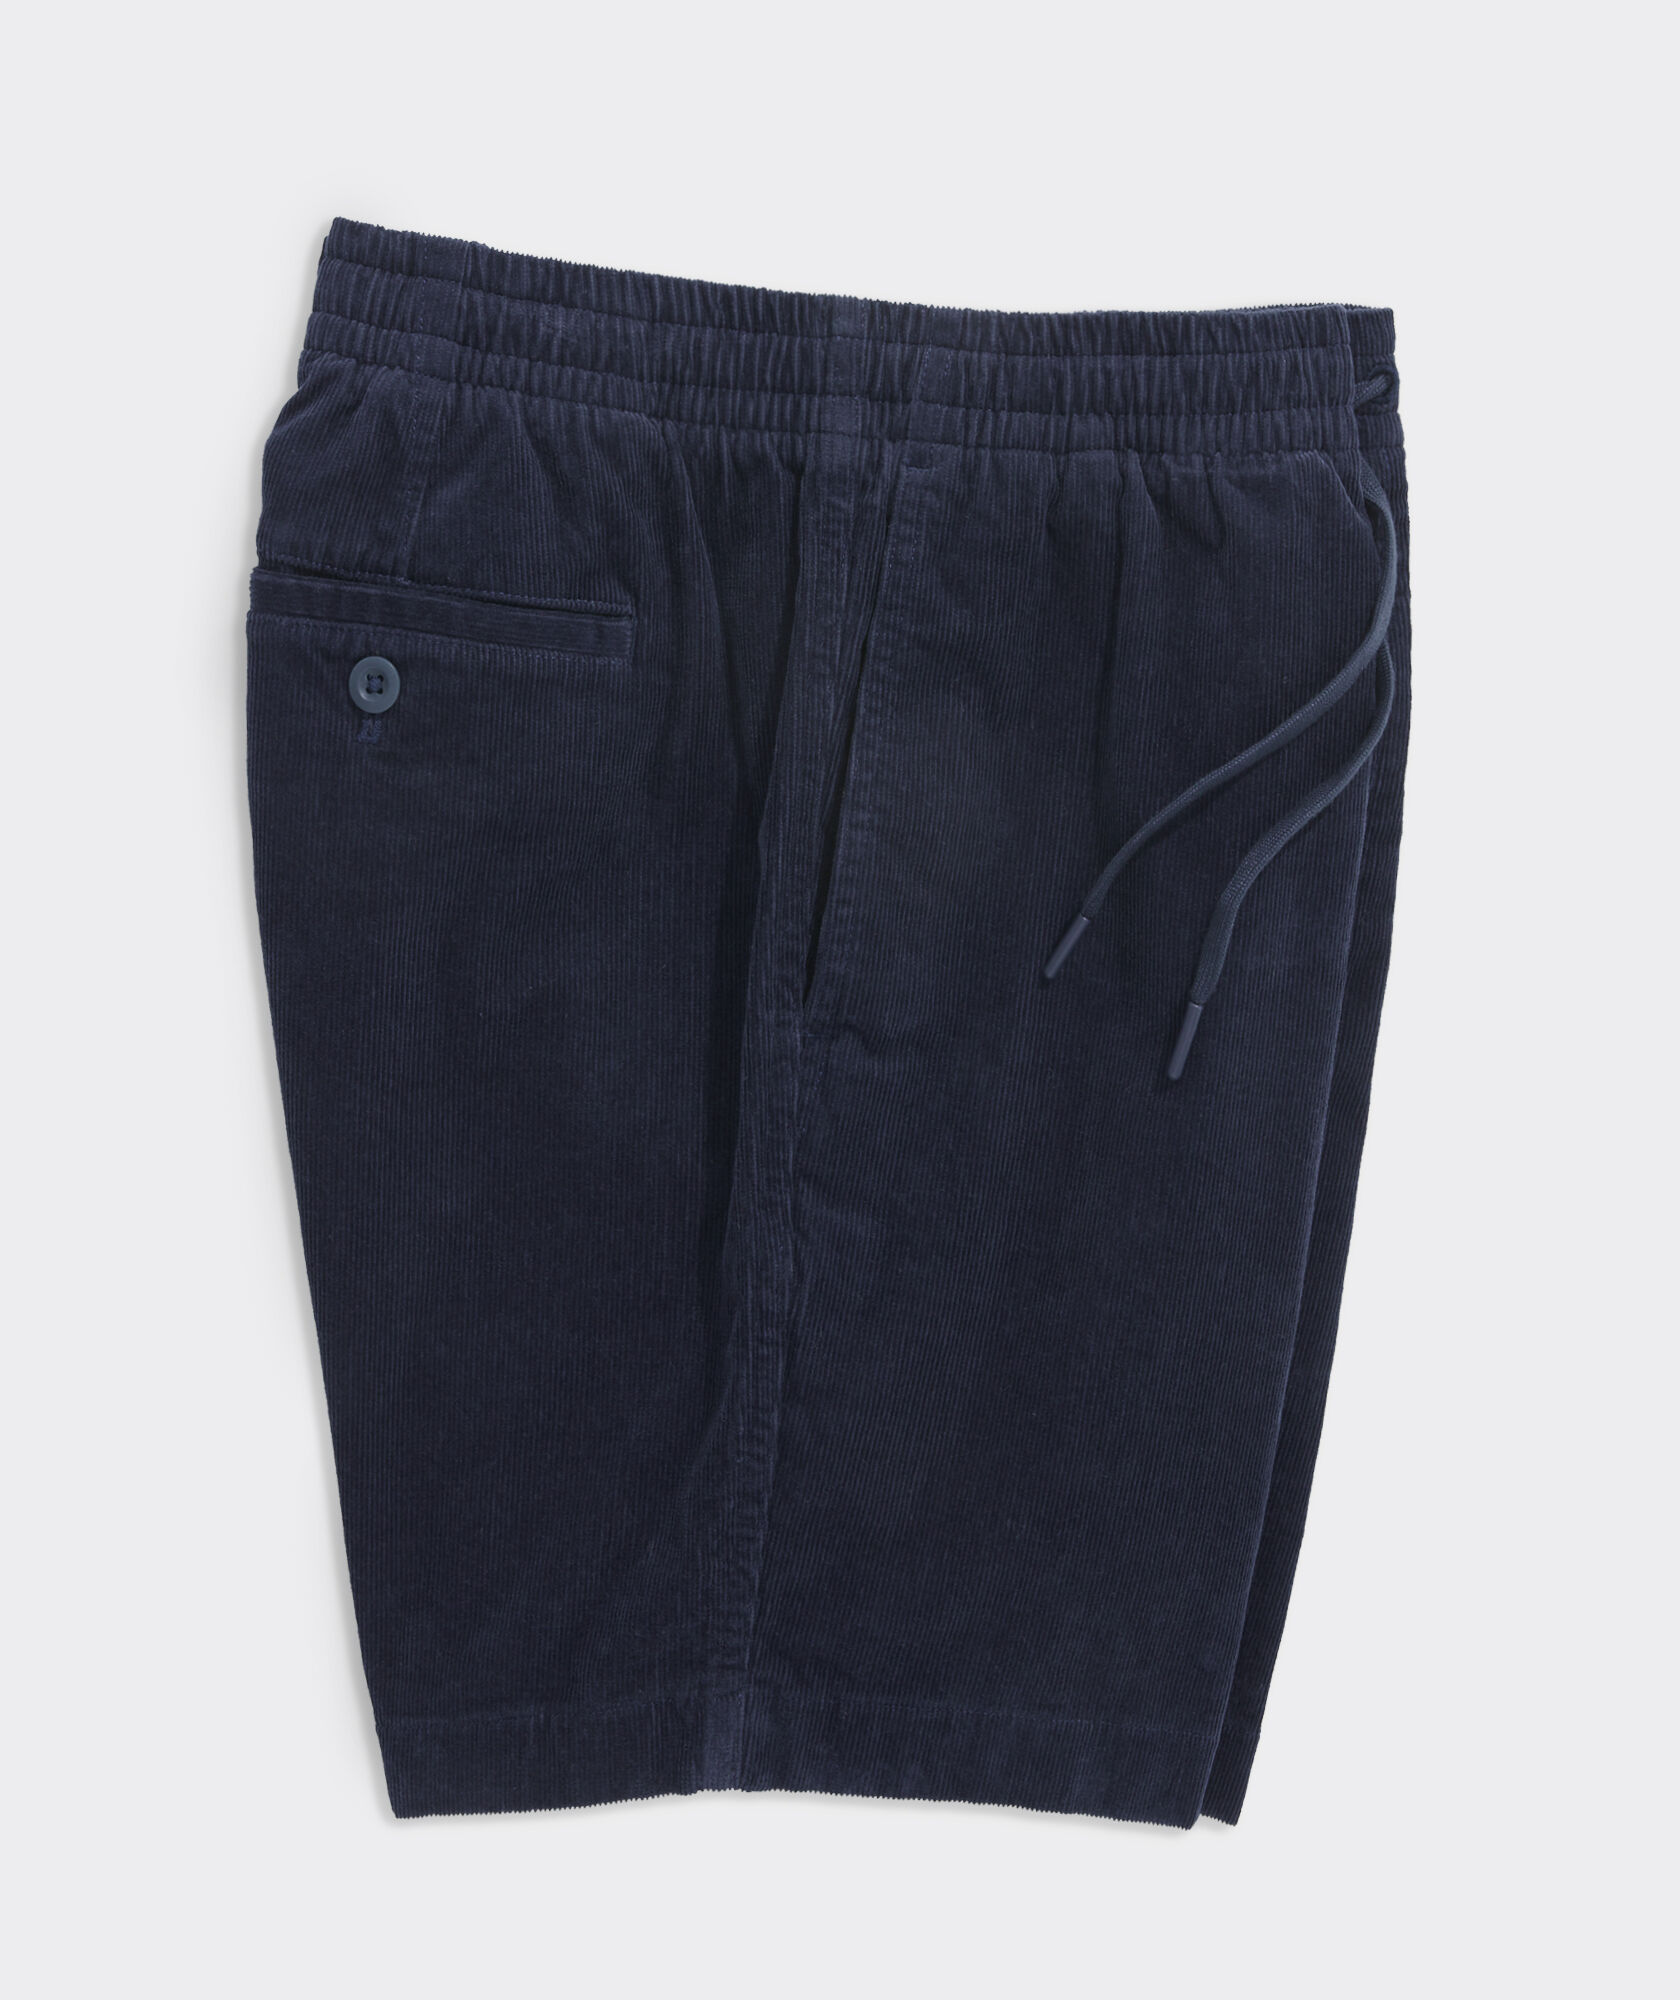 7 Inch Pull-On Corduroy Shorts